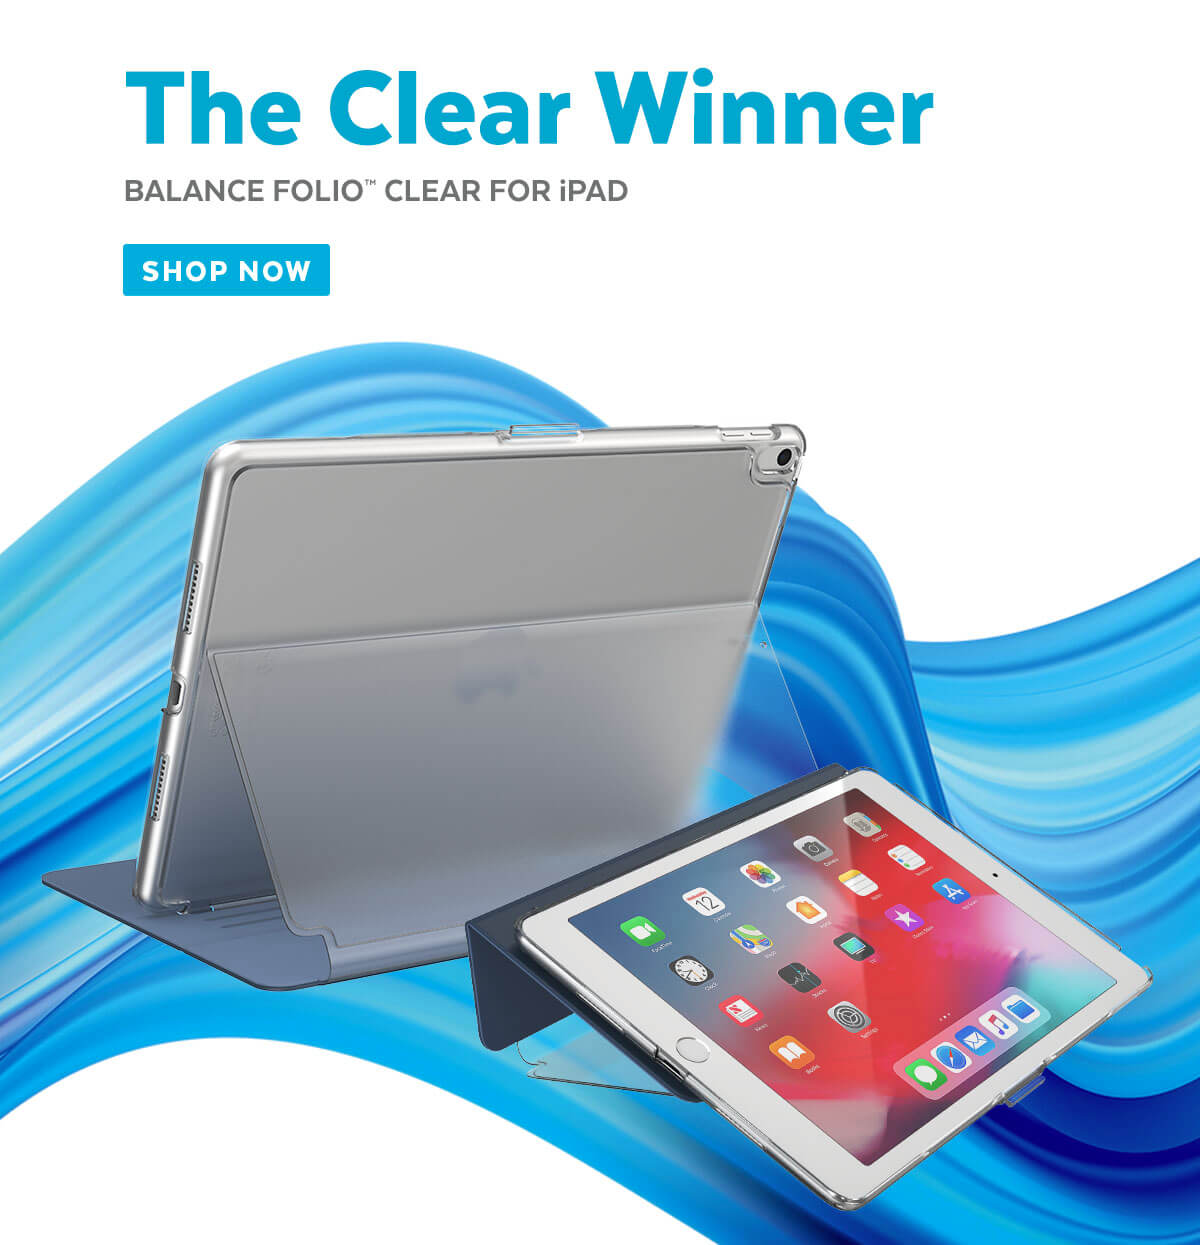 The Clear Winner. Balance Folio Clear for iPad. Shop now.